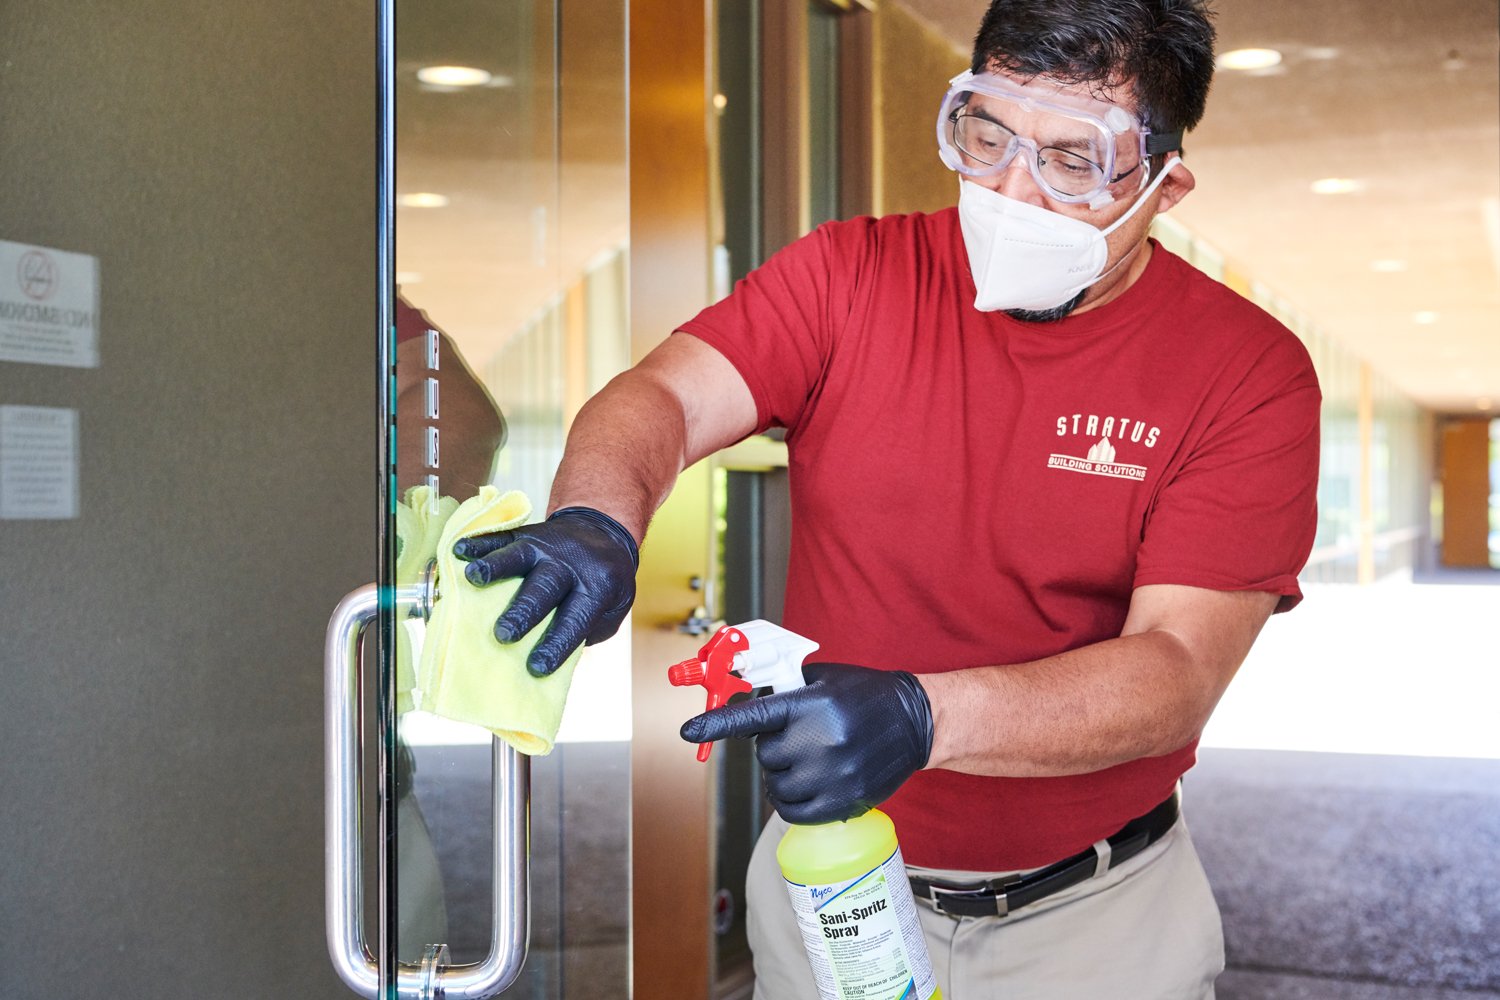 Disinfecting your home or building safely during COVID-19 - U.SPIRG